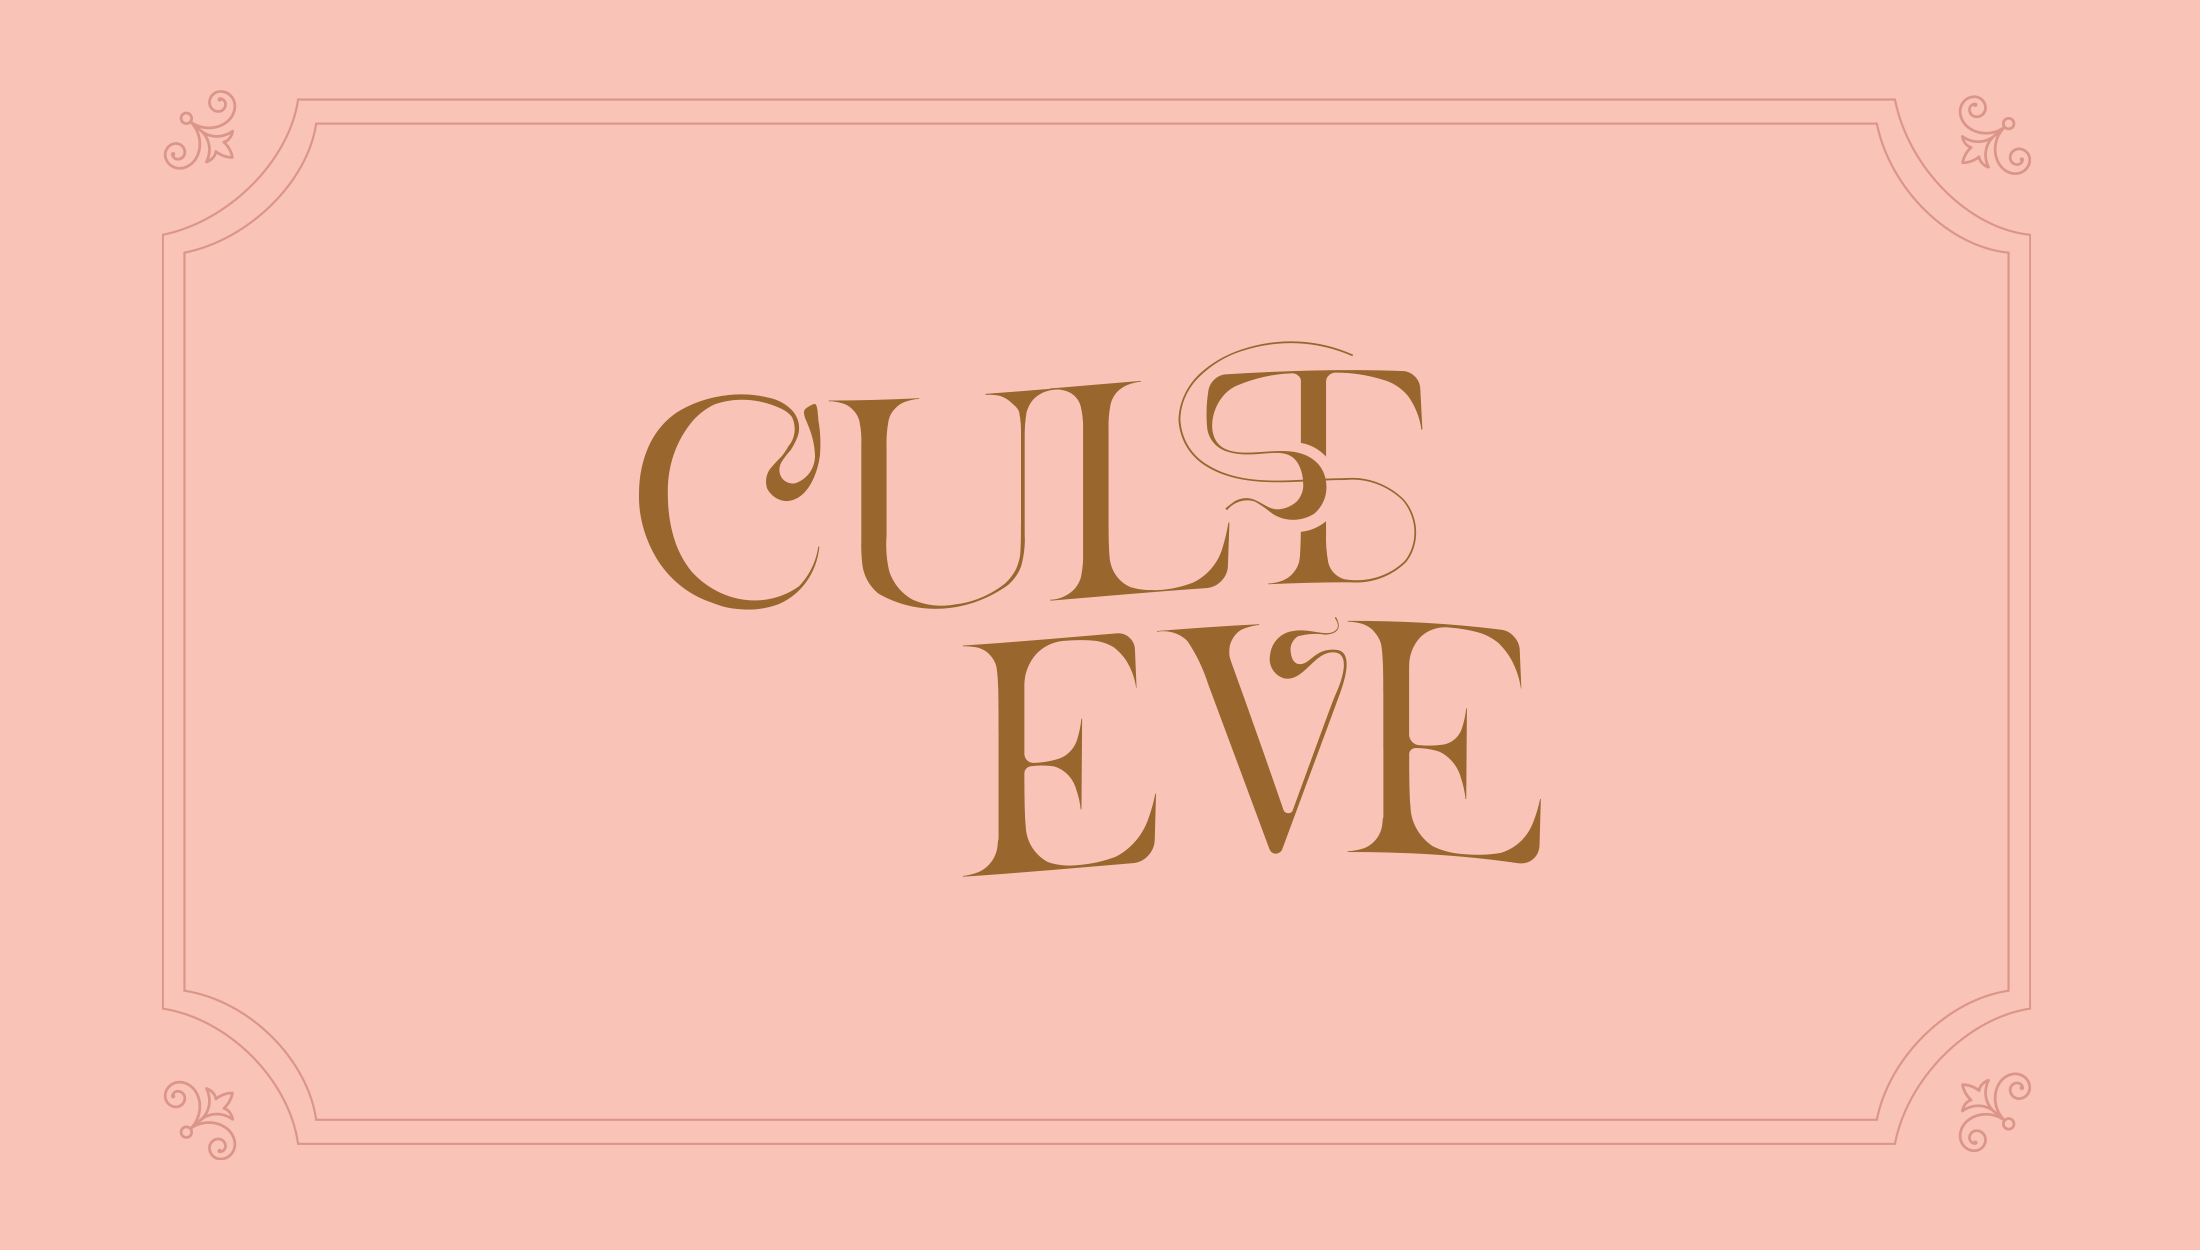 Logo design for Cult Eve, high-end, comfortable, luxury day-turned-night wear - designed by Wiltshire-based graphic designer, Kaye Huett